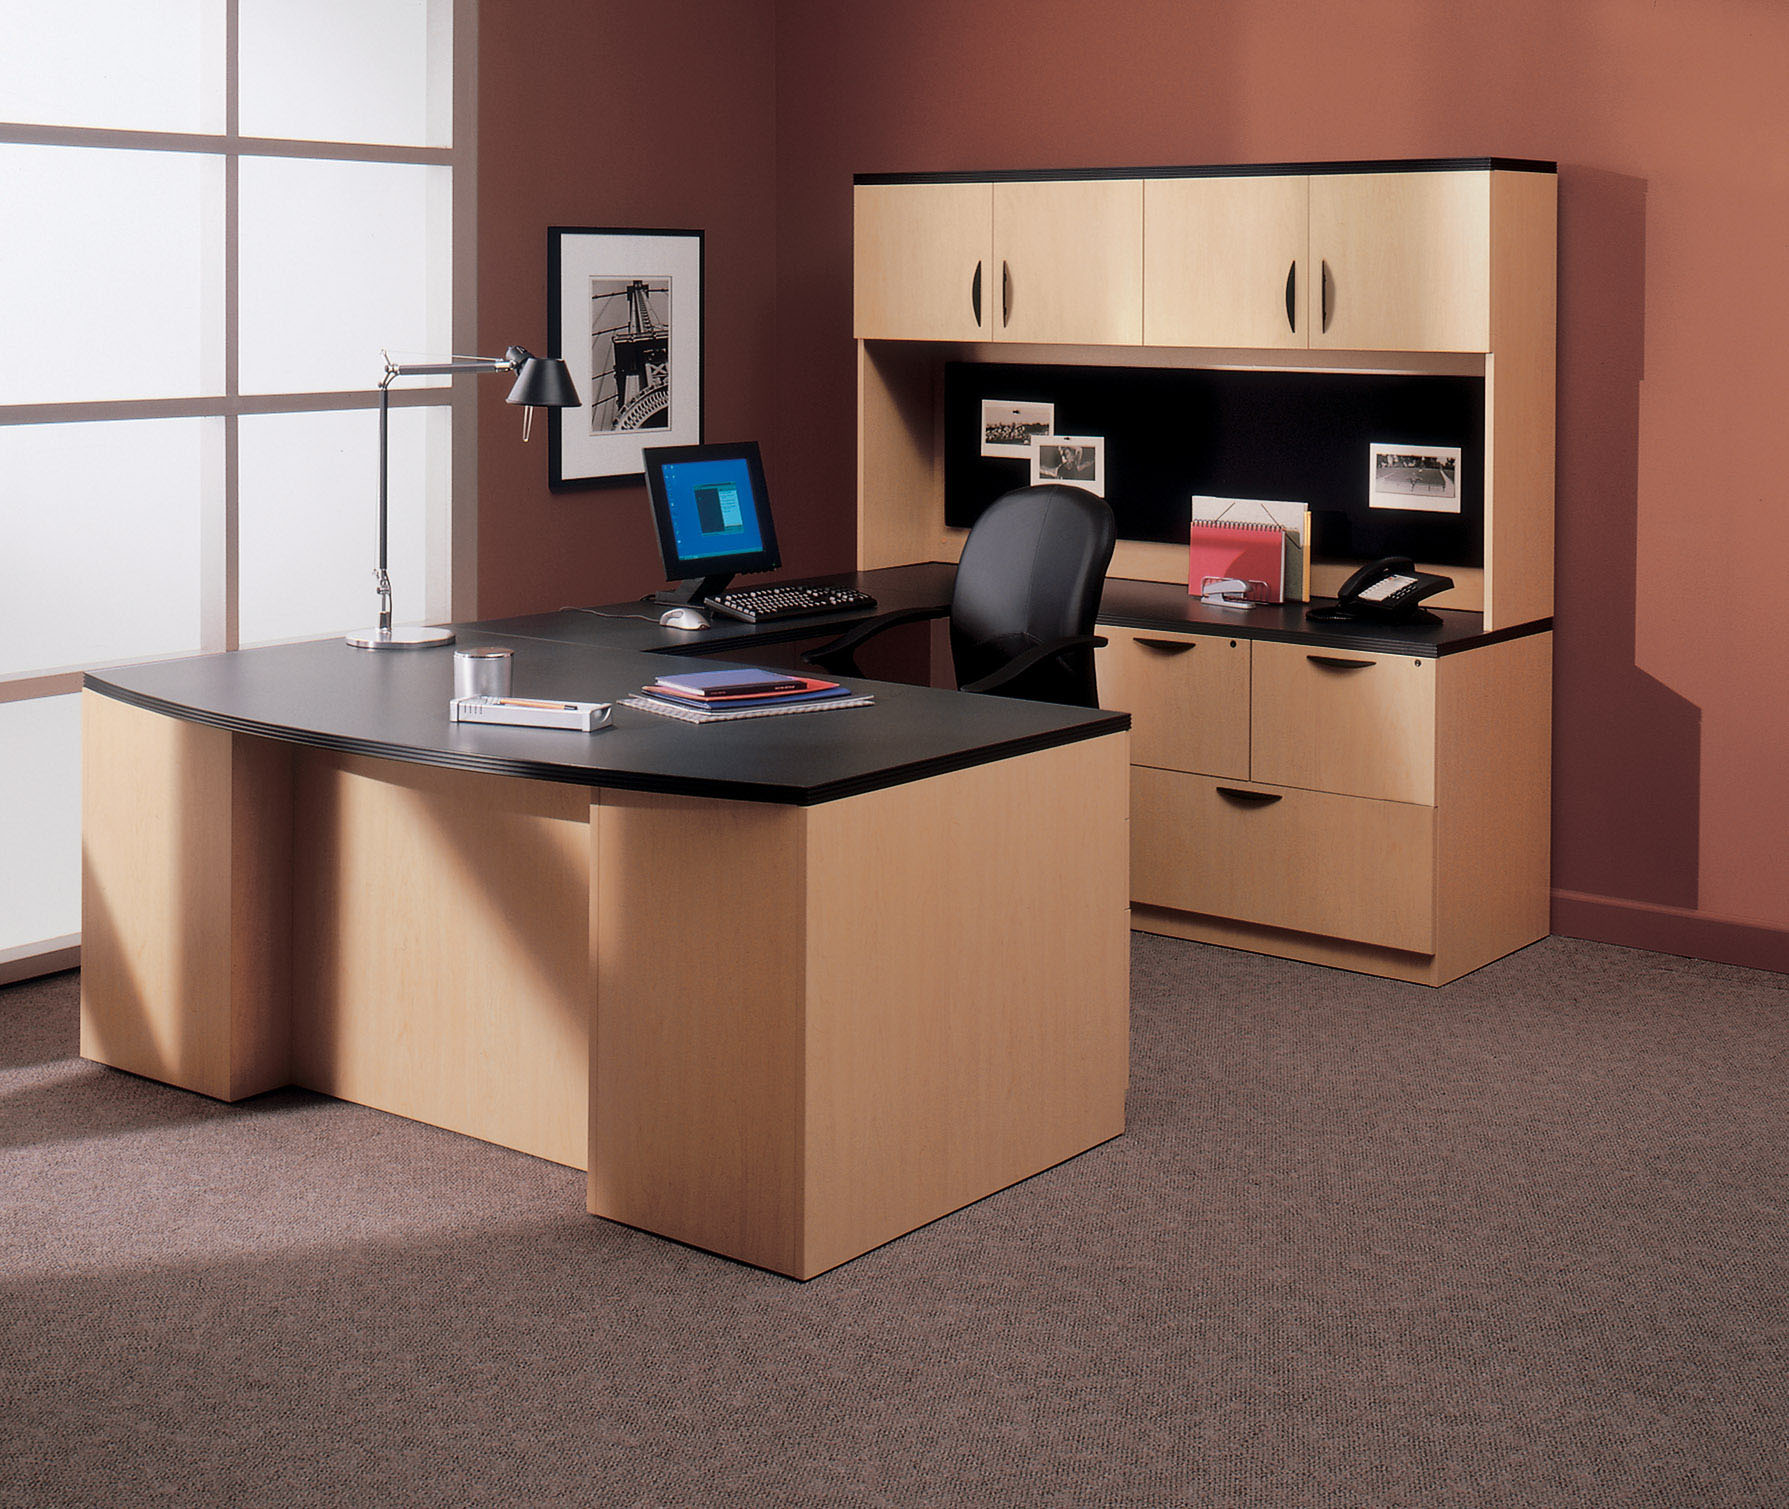 Office Office Room Astonishing On And Home Furniture Decorating Ideas Design 18 Office Room